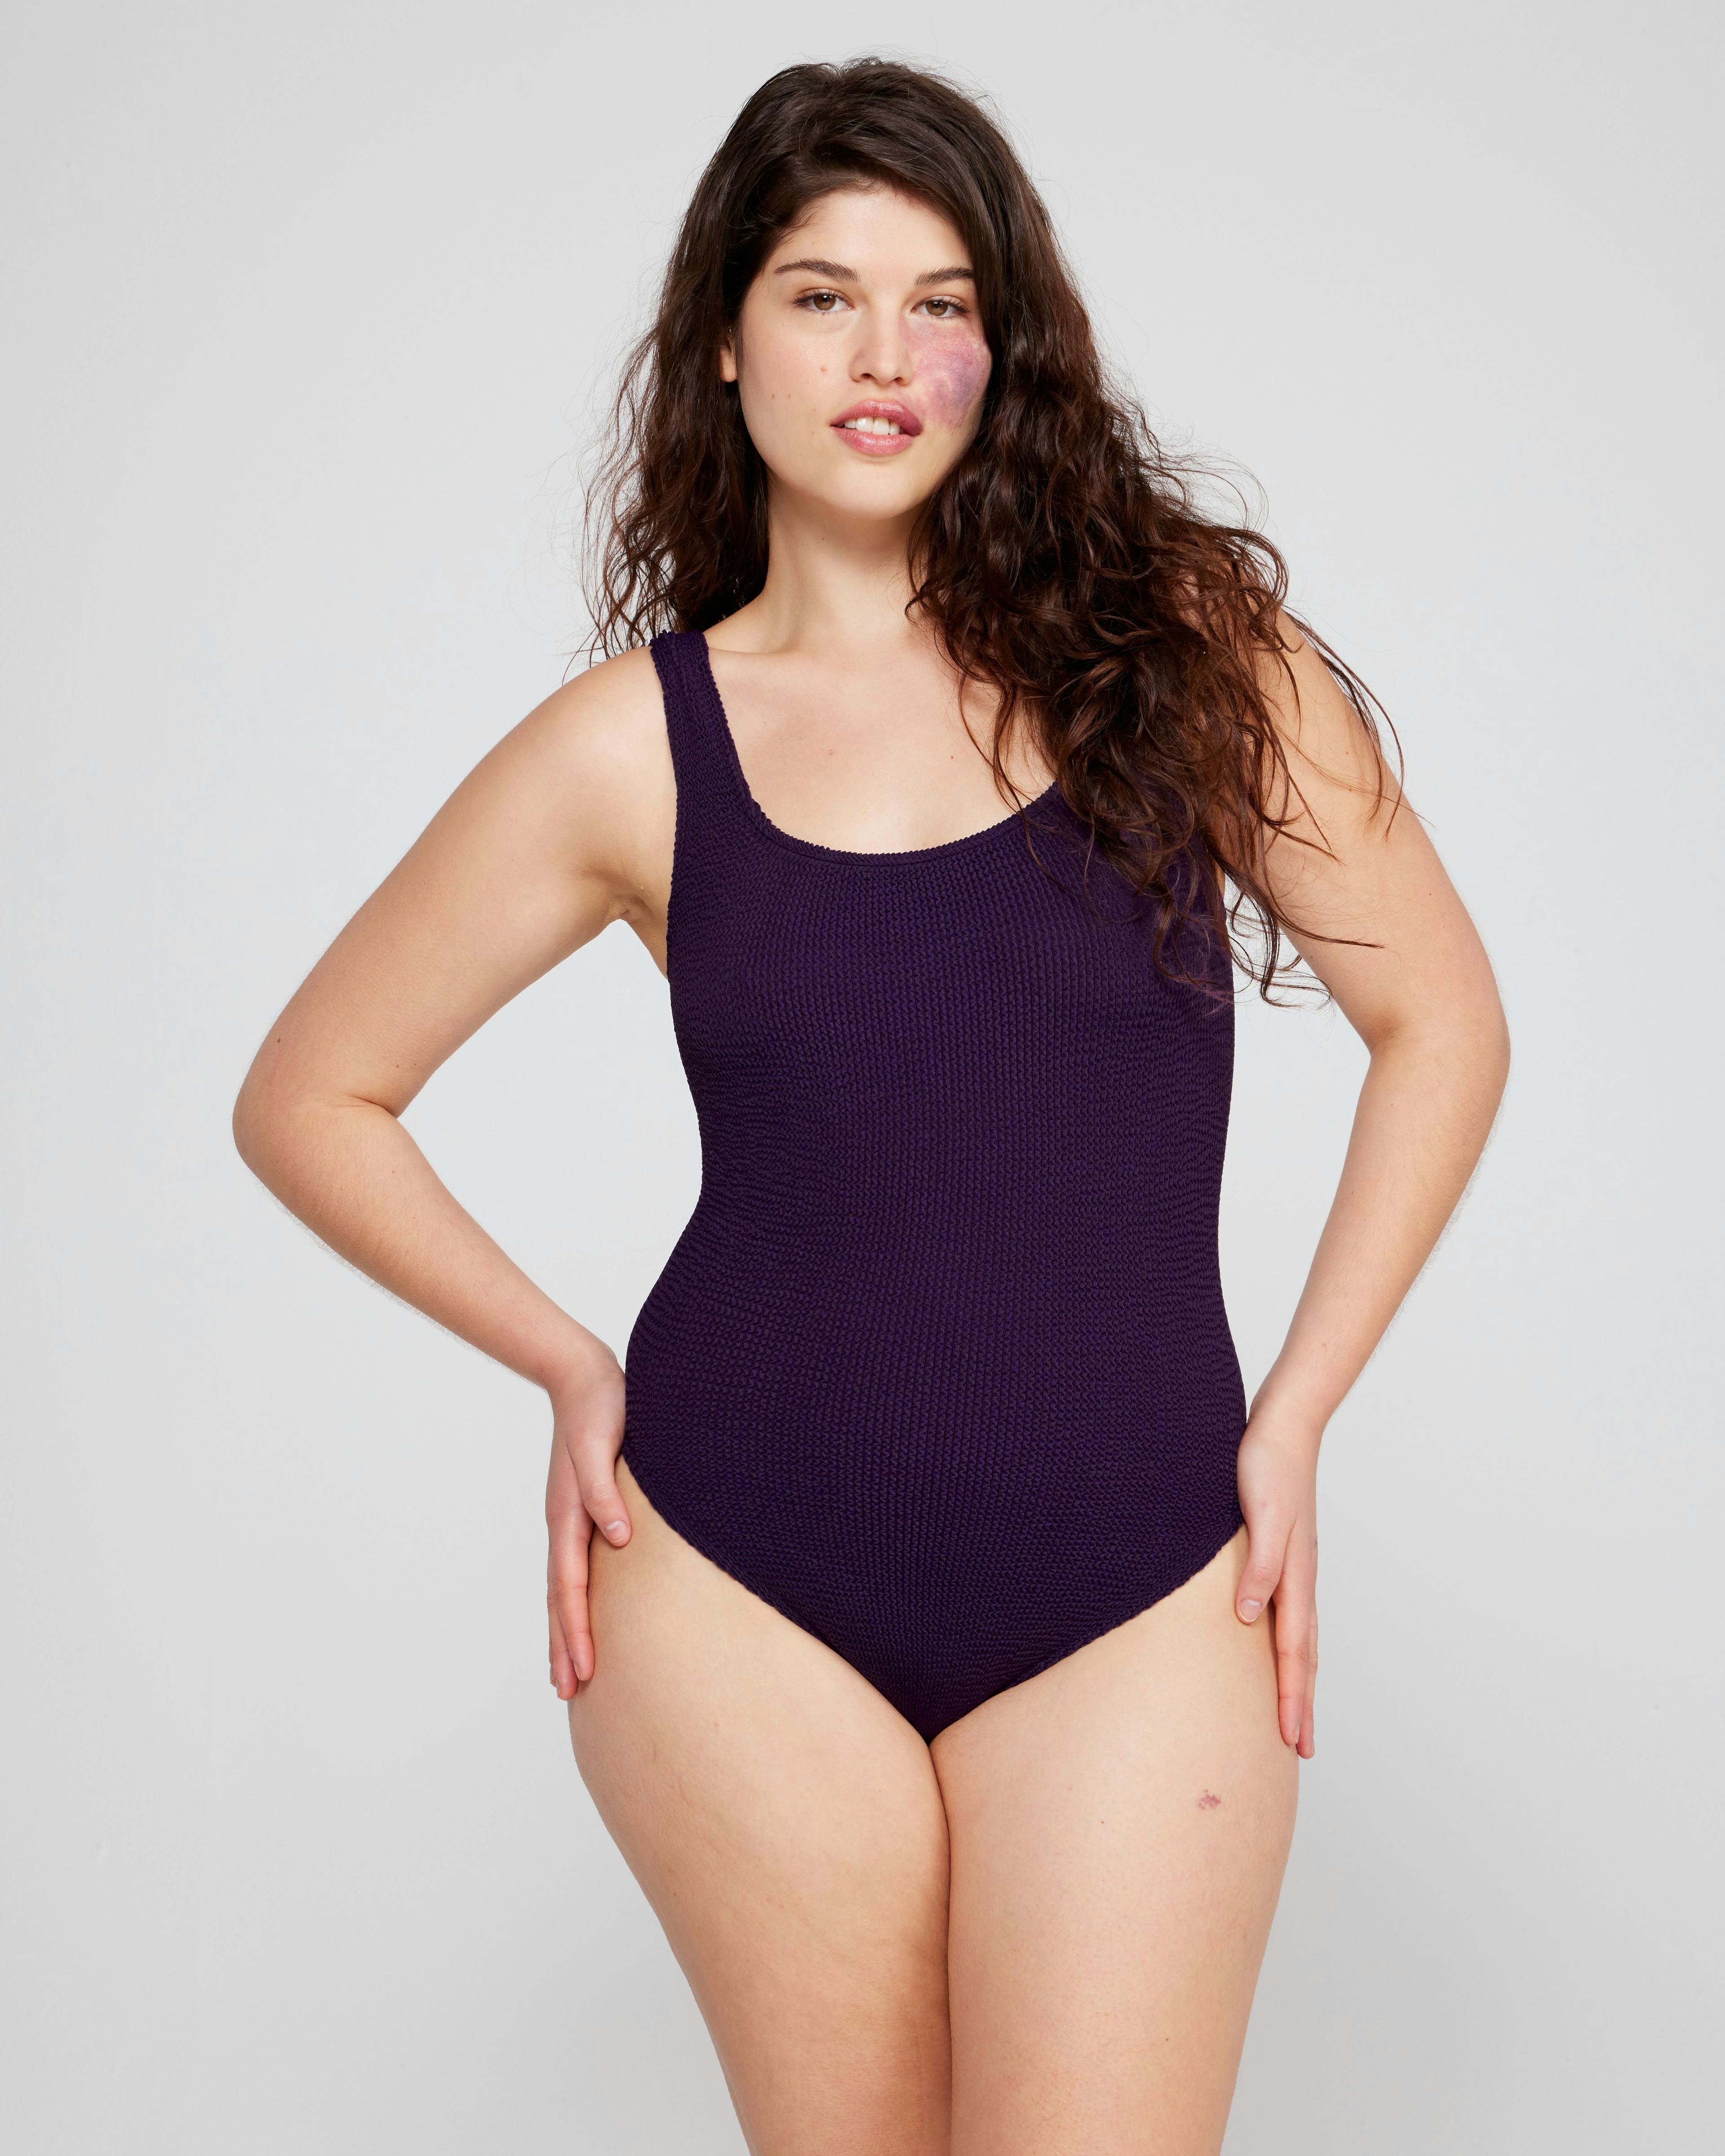 A model wearing Aplomb One-Piece